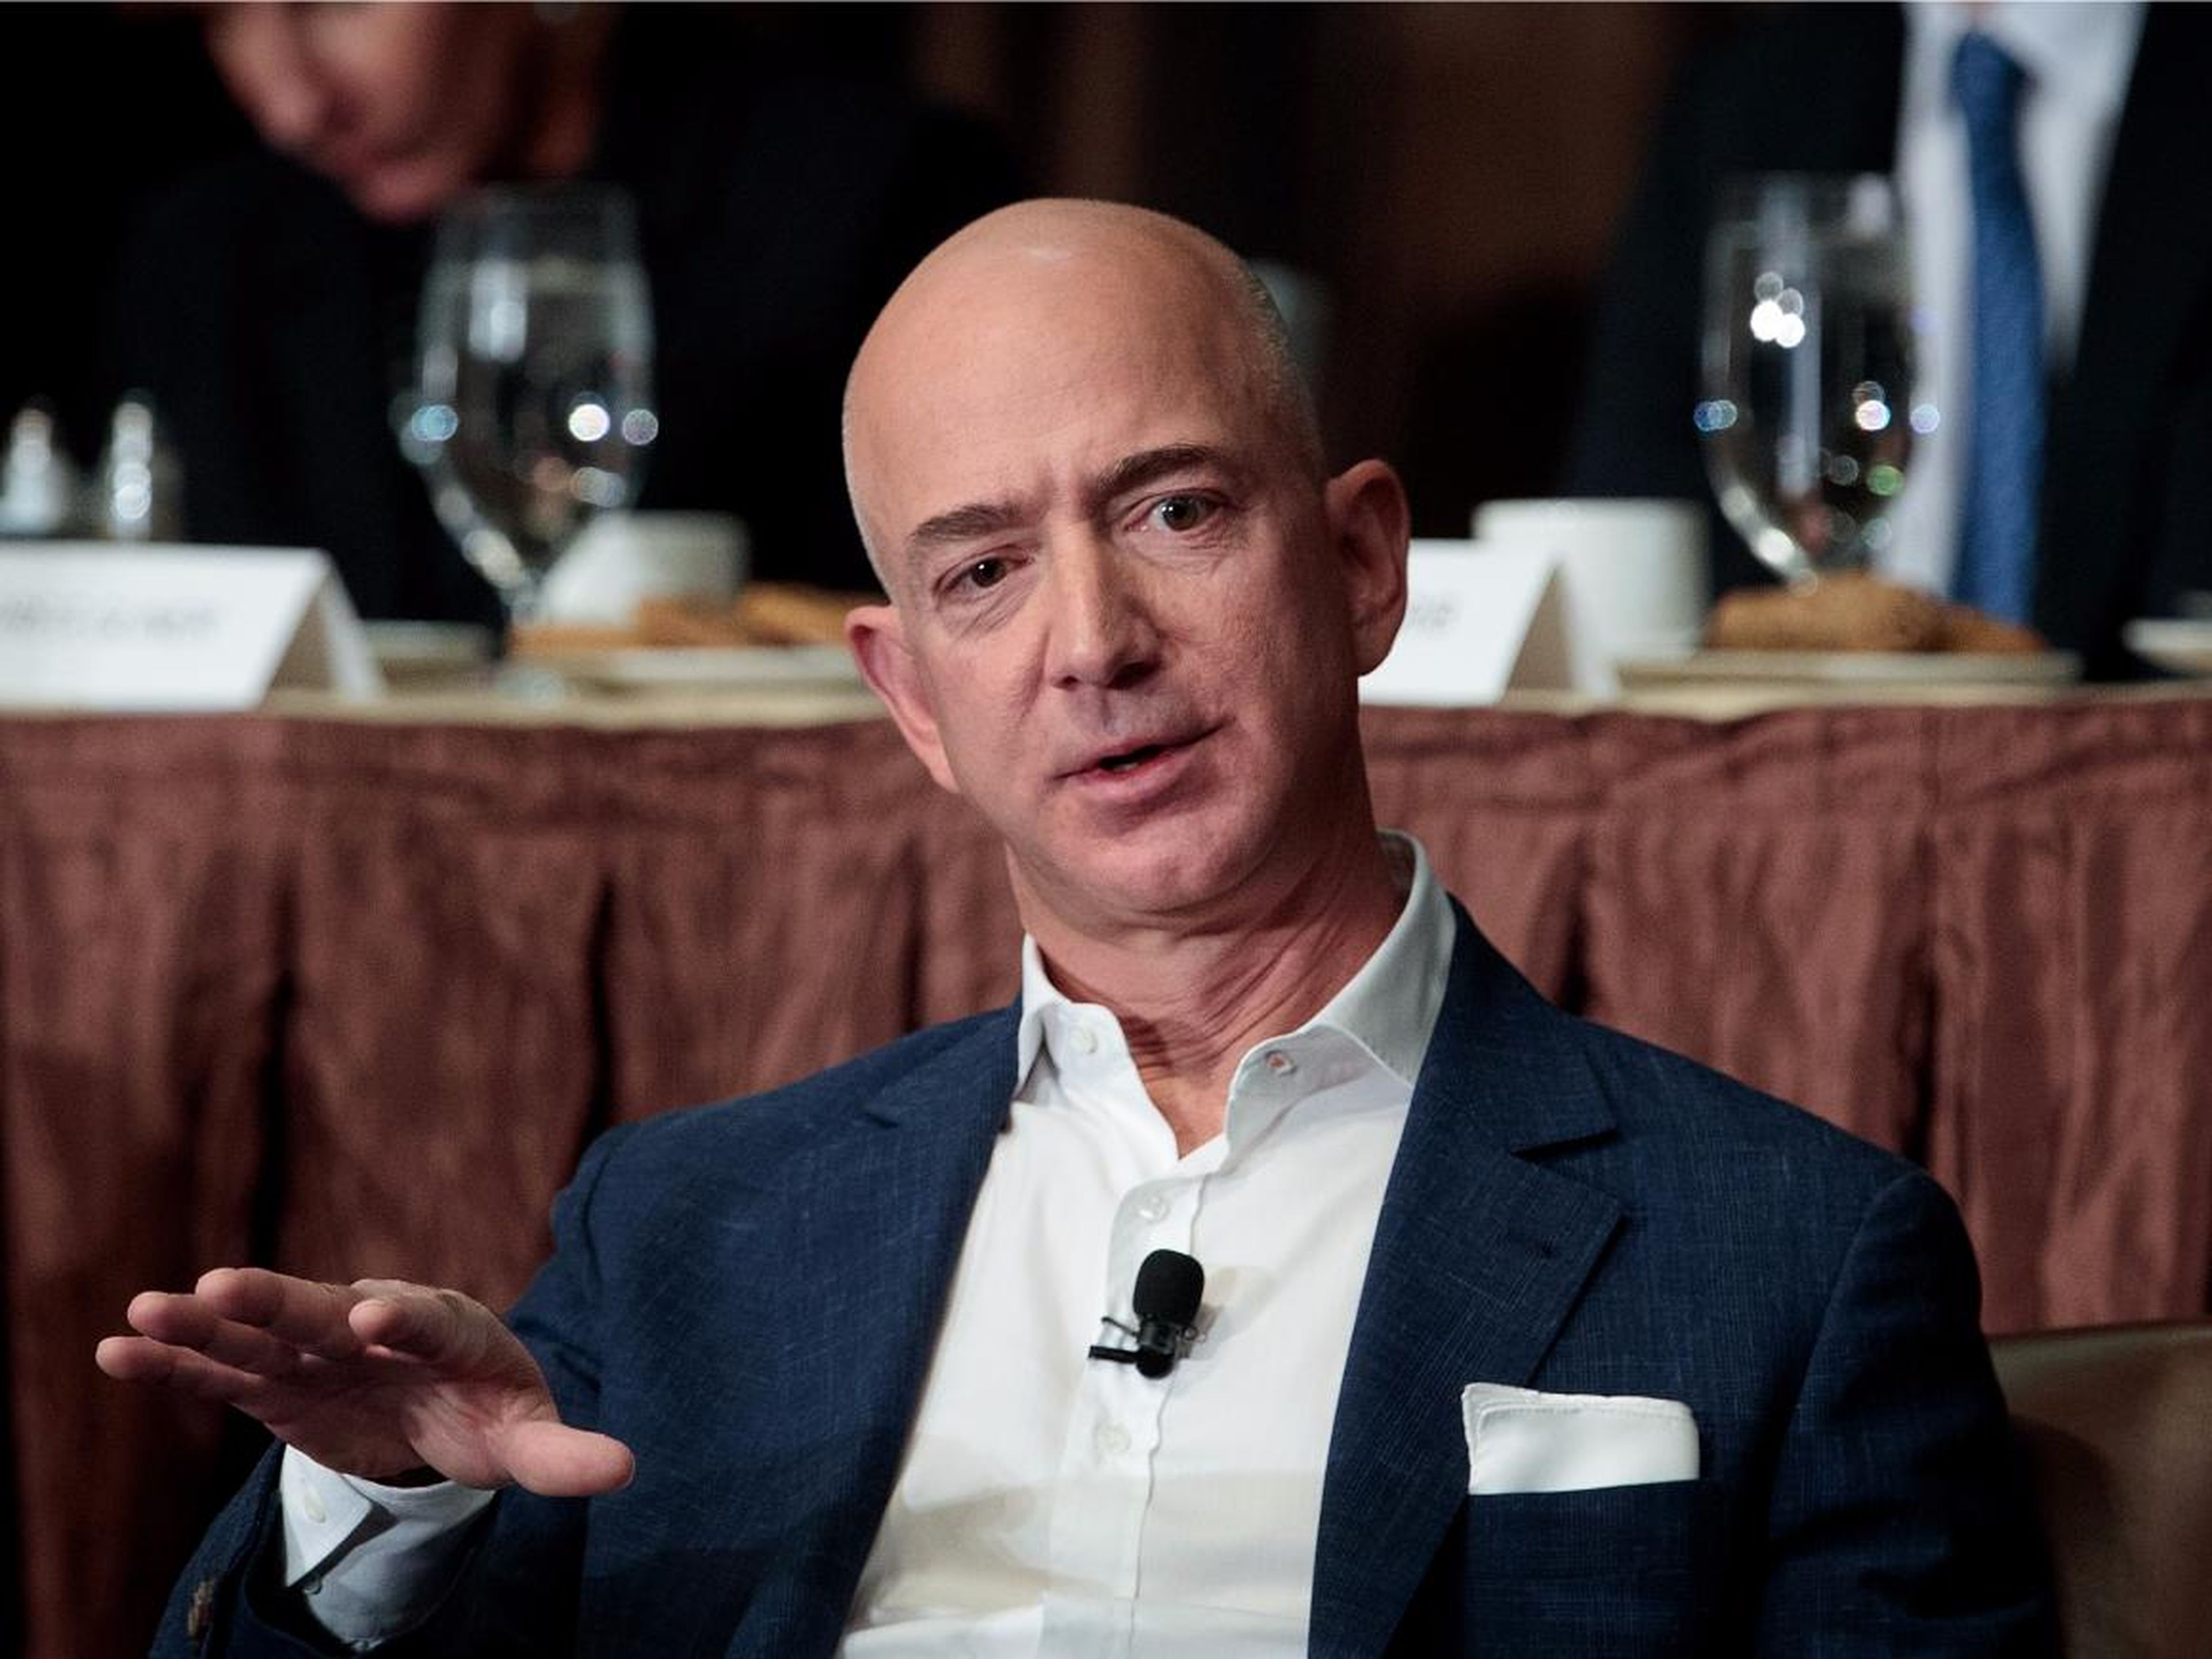 Dissatisfied customers can email Jeff Bezos directly and he'll forward the message along to the right person — with one dreaded addition: "?"